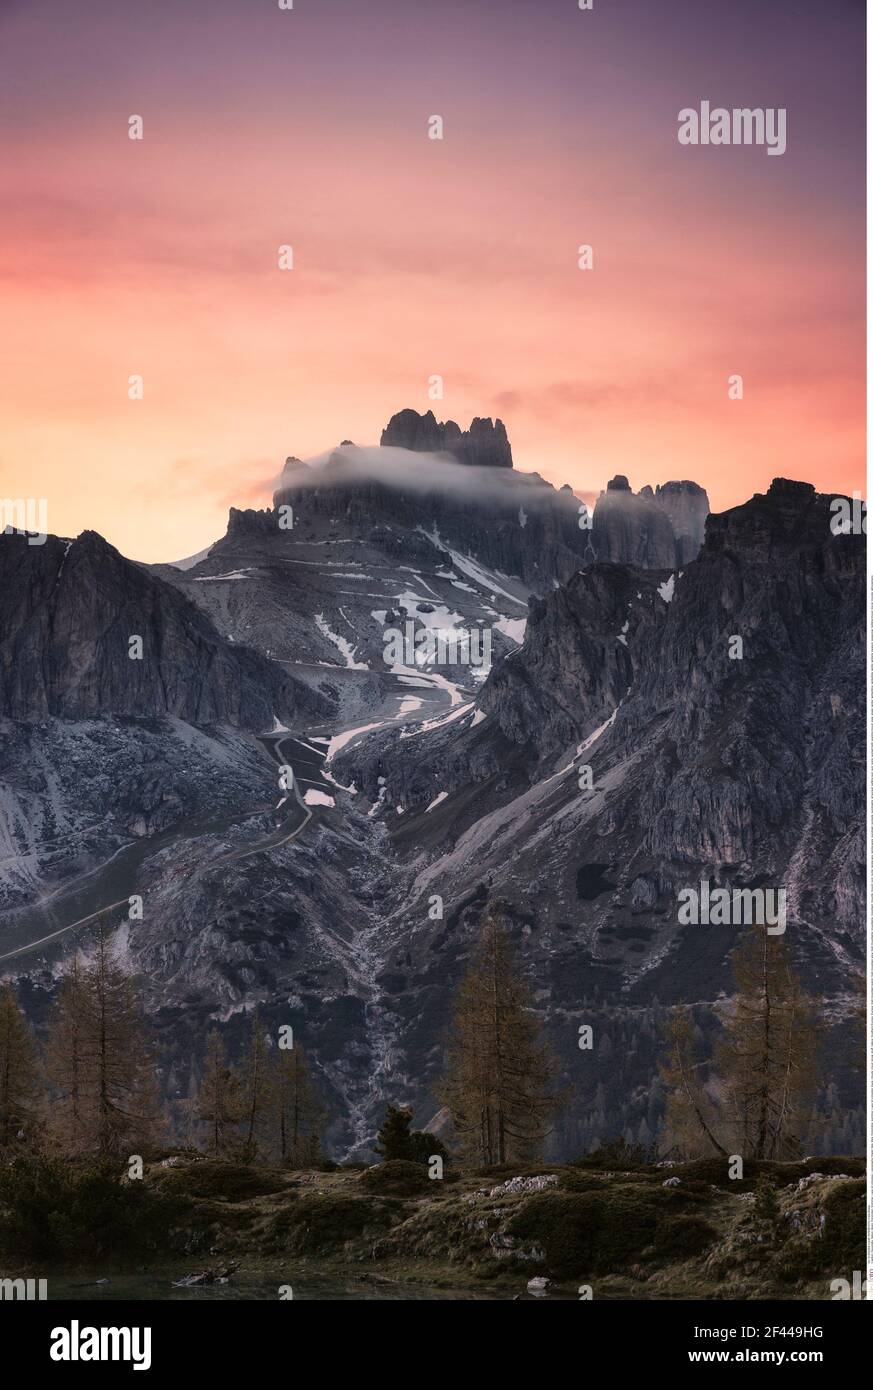 Geographie / Reisen, Italien, Alpen, Dolomiten, Sommer, Lago di Limedes, Additional-Rights-Clearance-Info-not-available Stockfoto